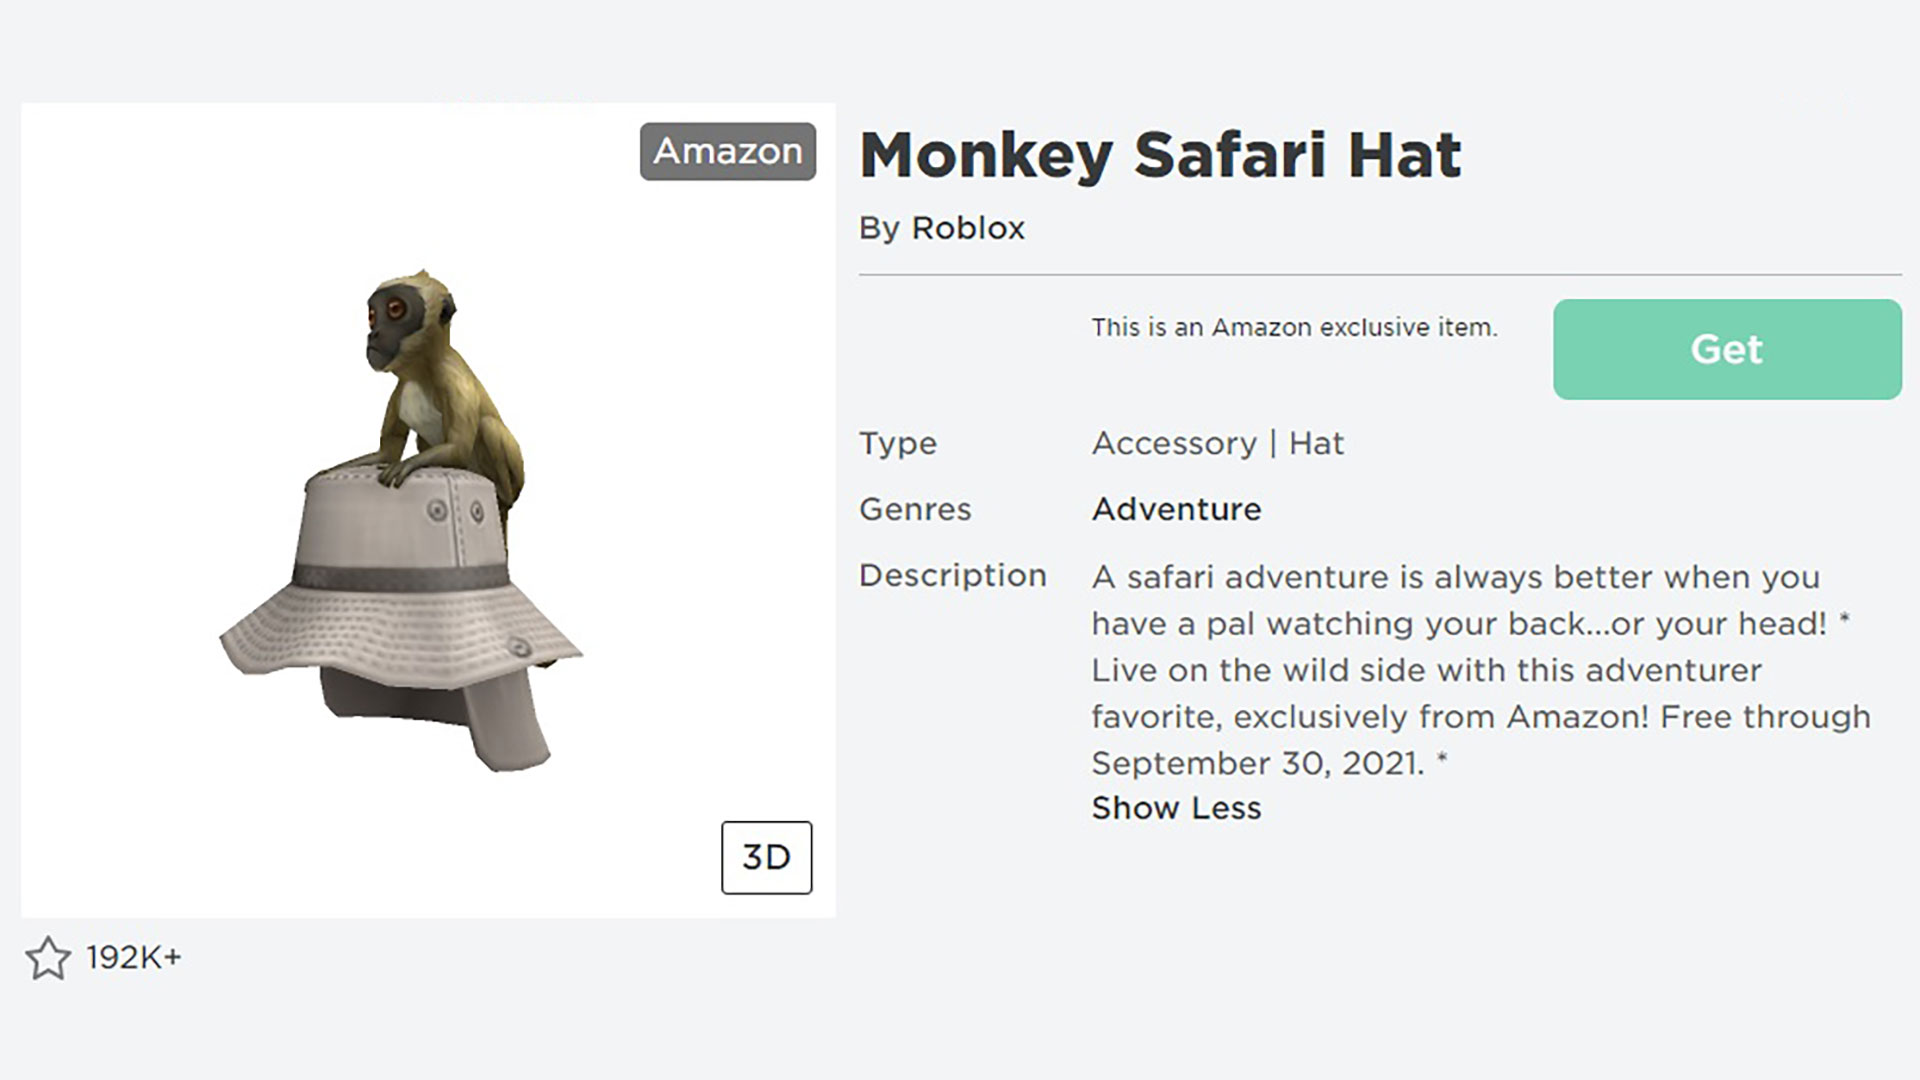 NEW* LEAKED PROMO CODE ITEM ON ROBLOX?! (TV HAT) 